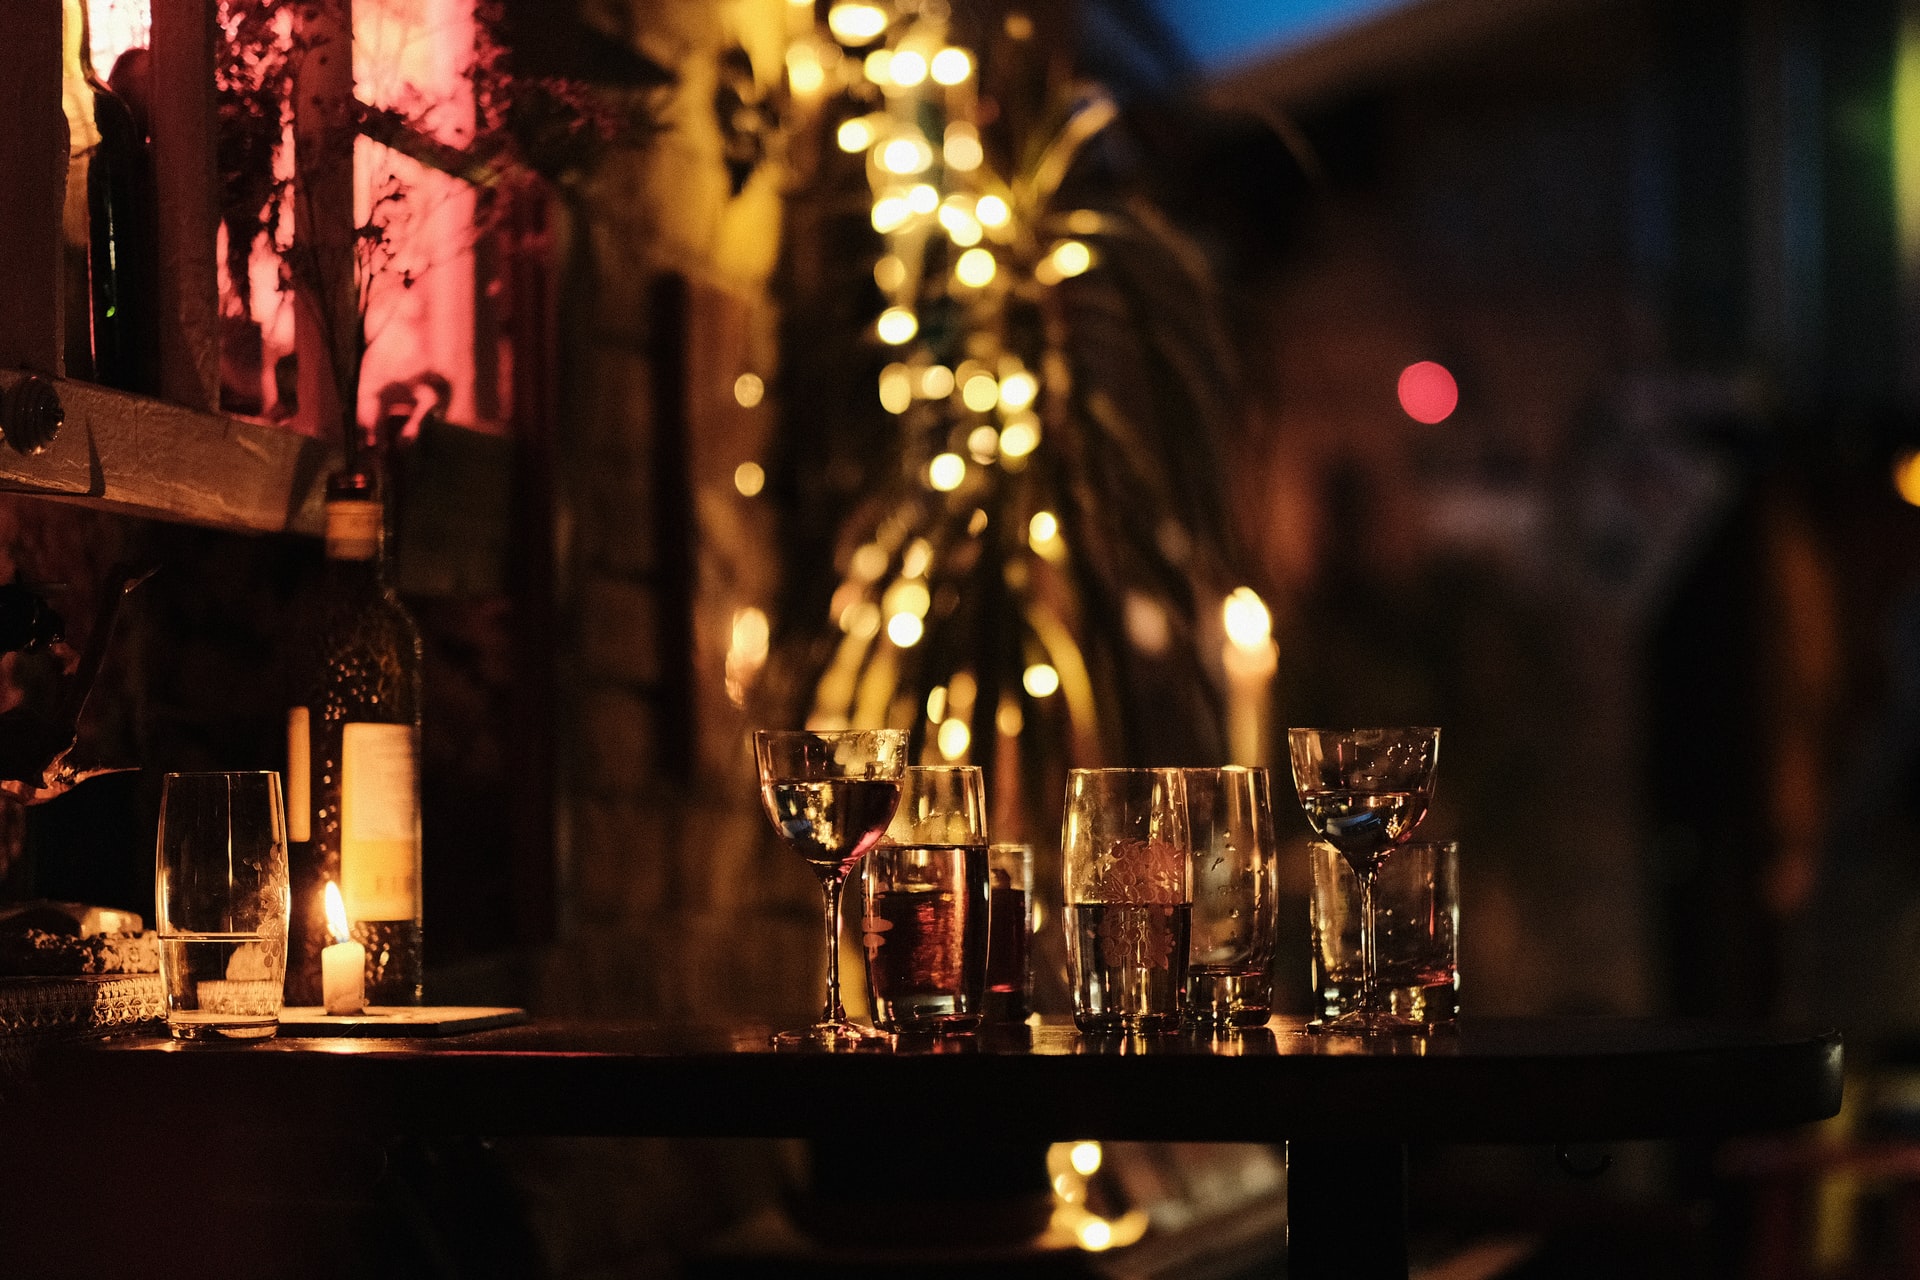 Beer and wine glasses on table outside at night lit by fairy lights in rustic Mediterranean village street
